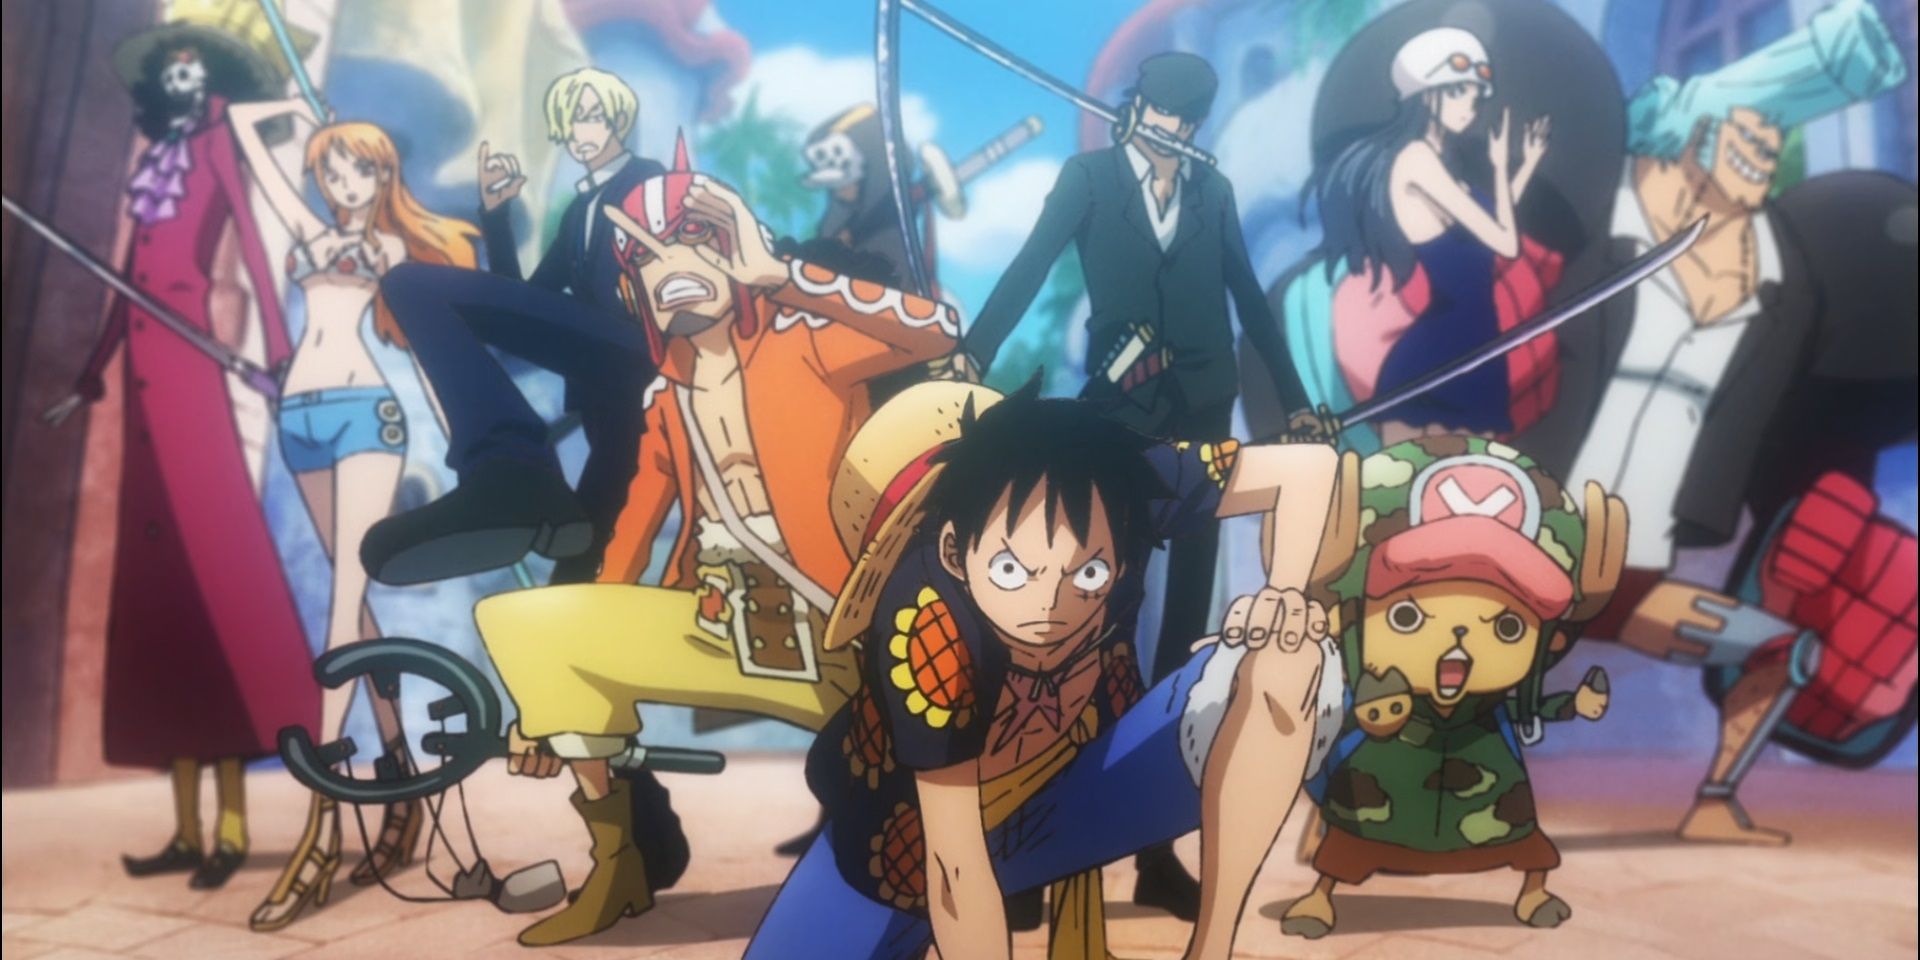 The Straw Hats Work For The Future King Of Pirates (One Piece)